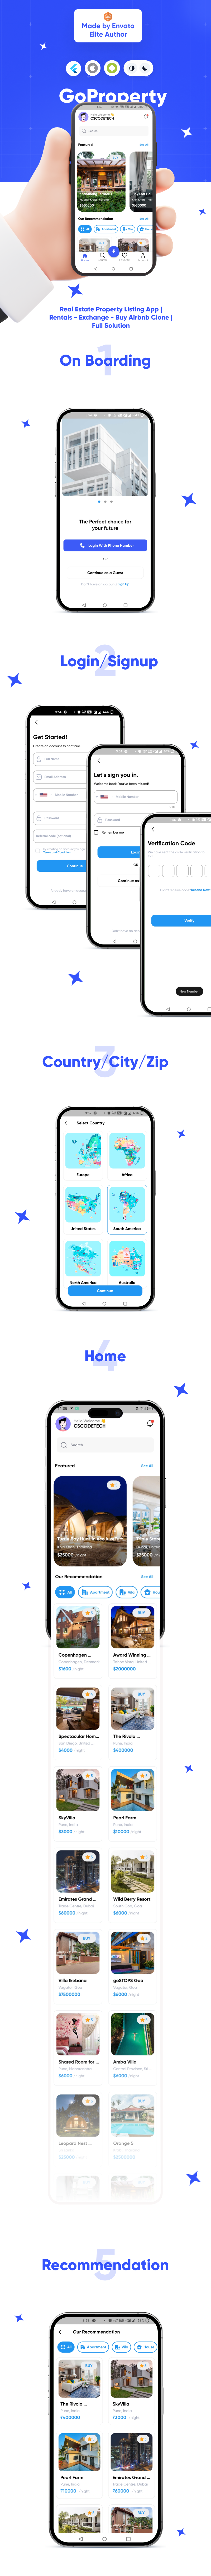 GoProperty - Real Estate Property Listing App | Rentals-Exchange-Buy | Airbnb Clone | Full Solution - 2